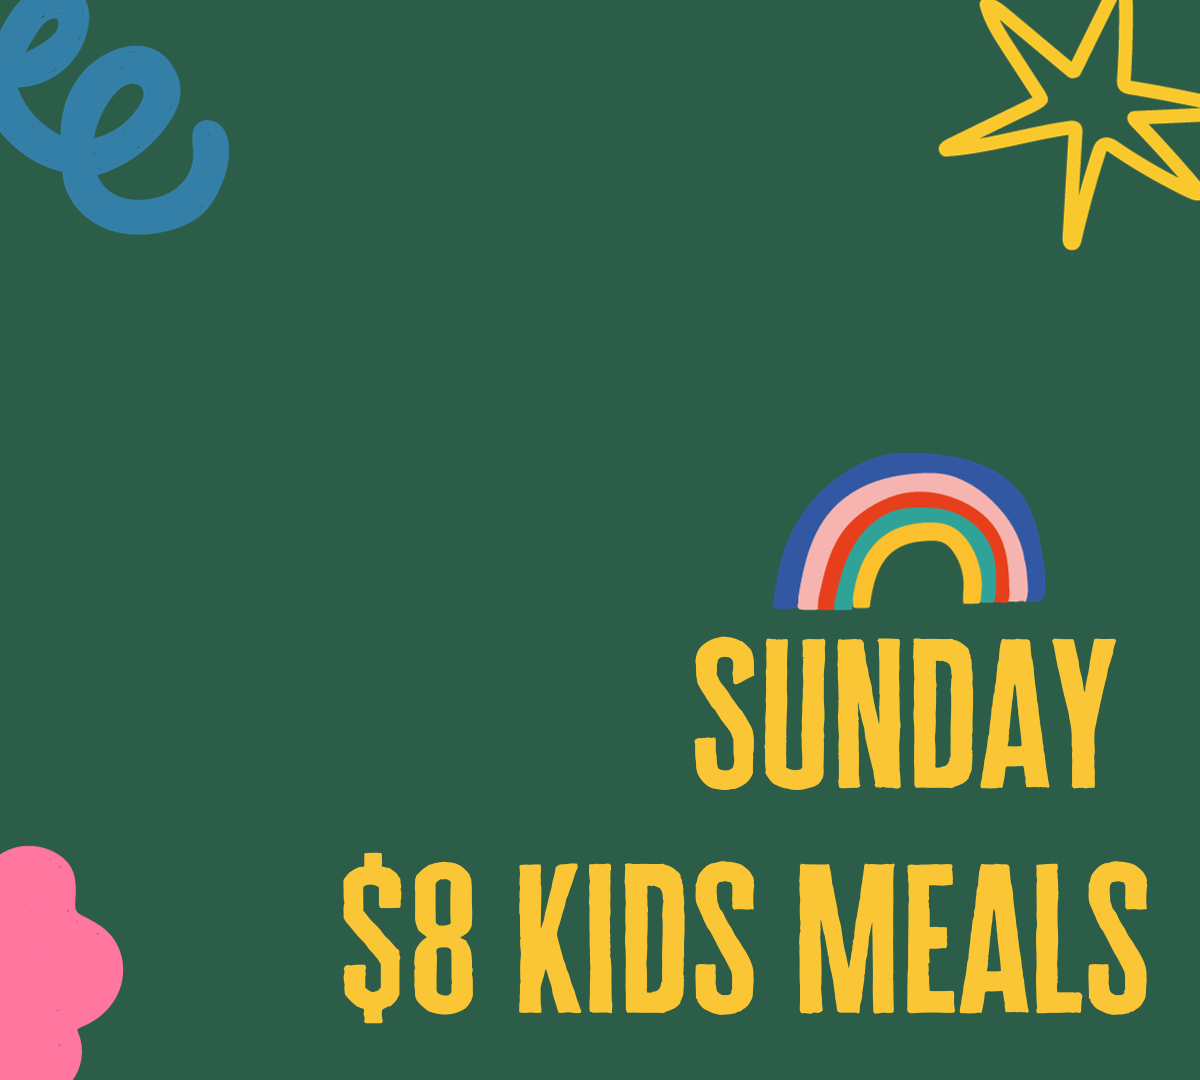 RoyAl's Chicken and Burger Specials: Sunday $8 Kids Meals